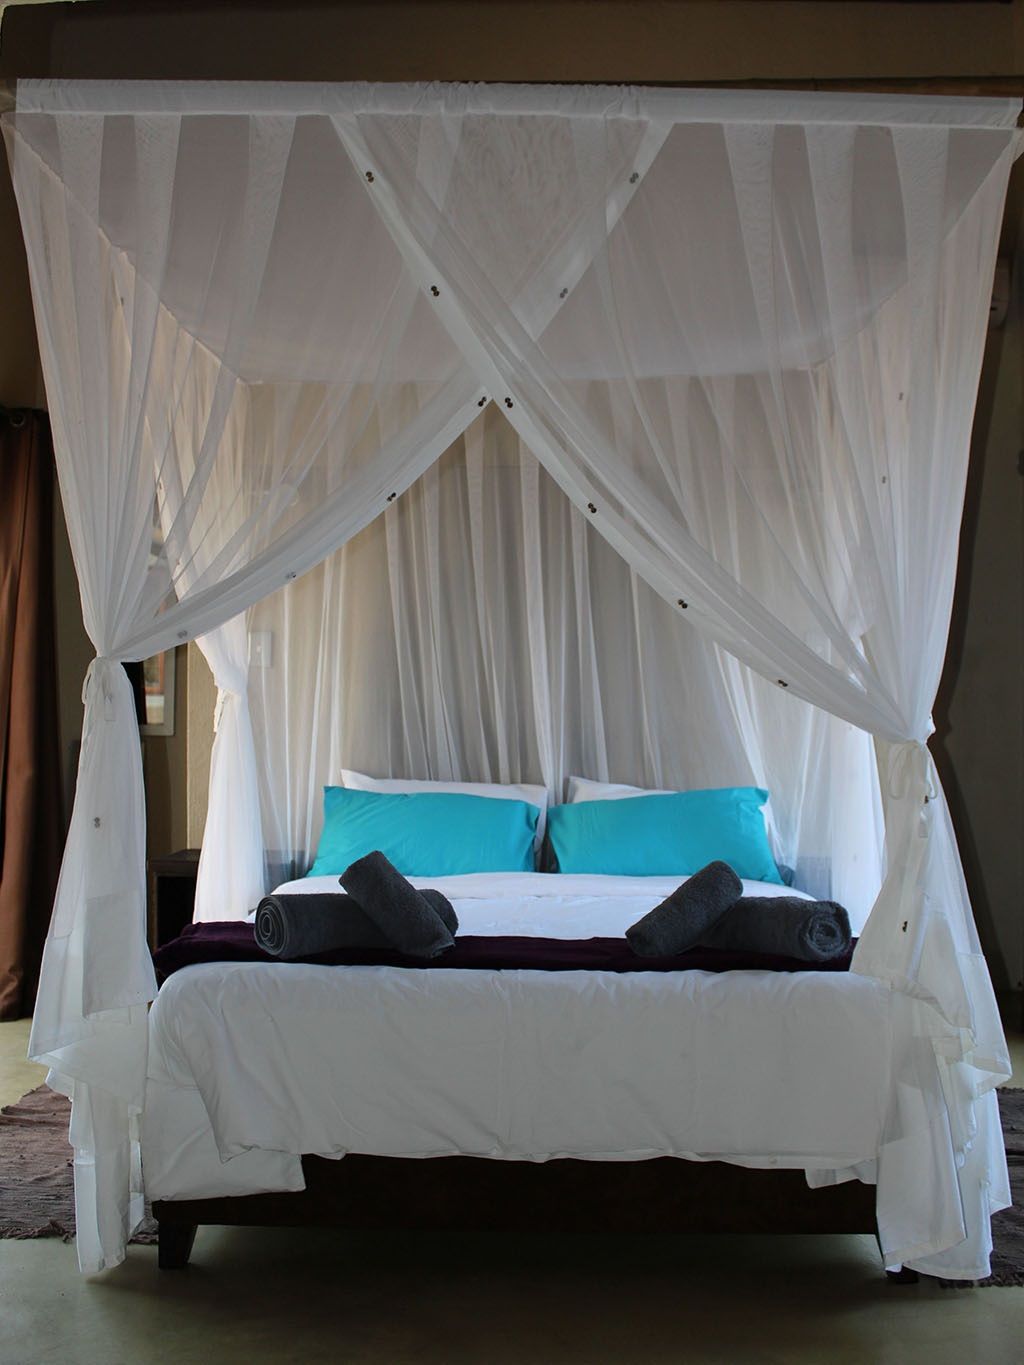 Four poster bed with white canopy curtains and turquoise pillows